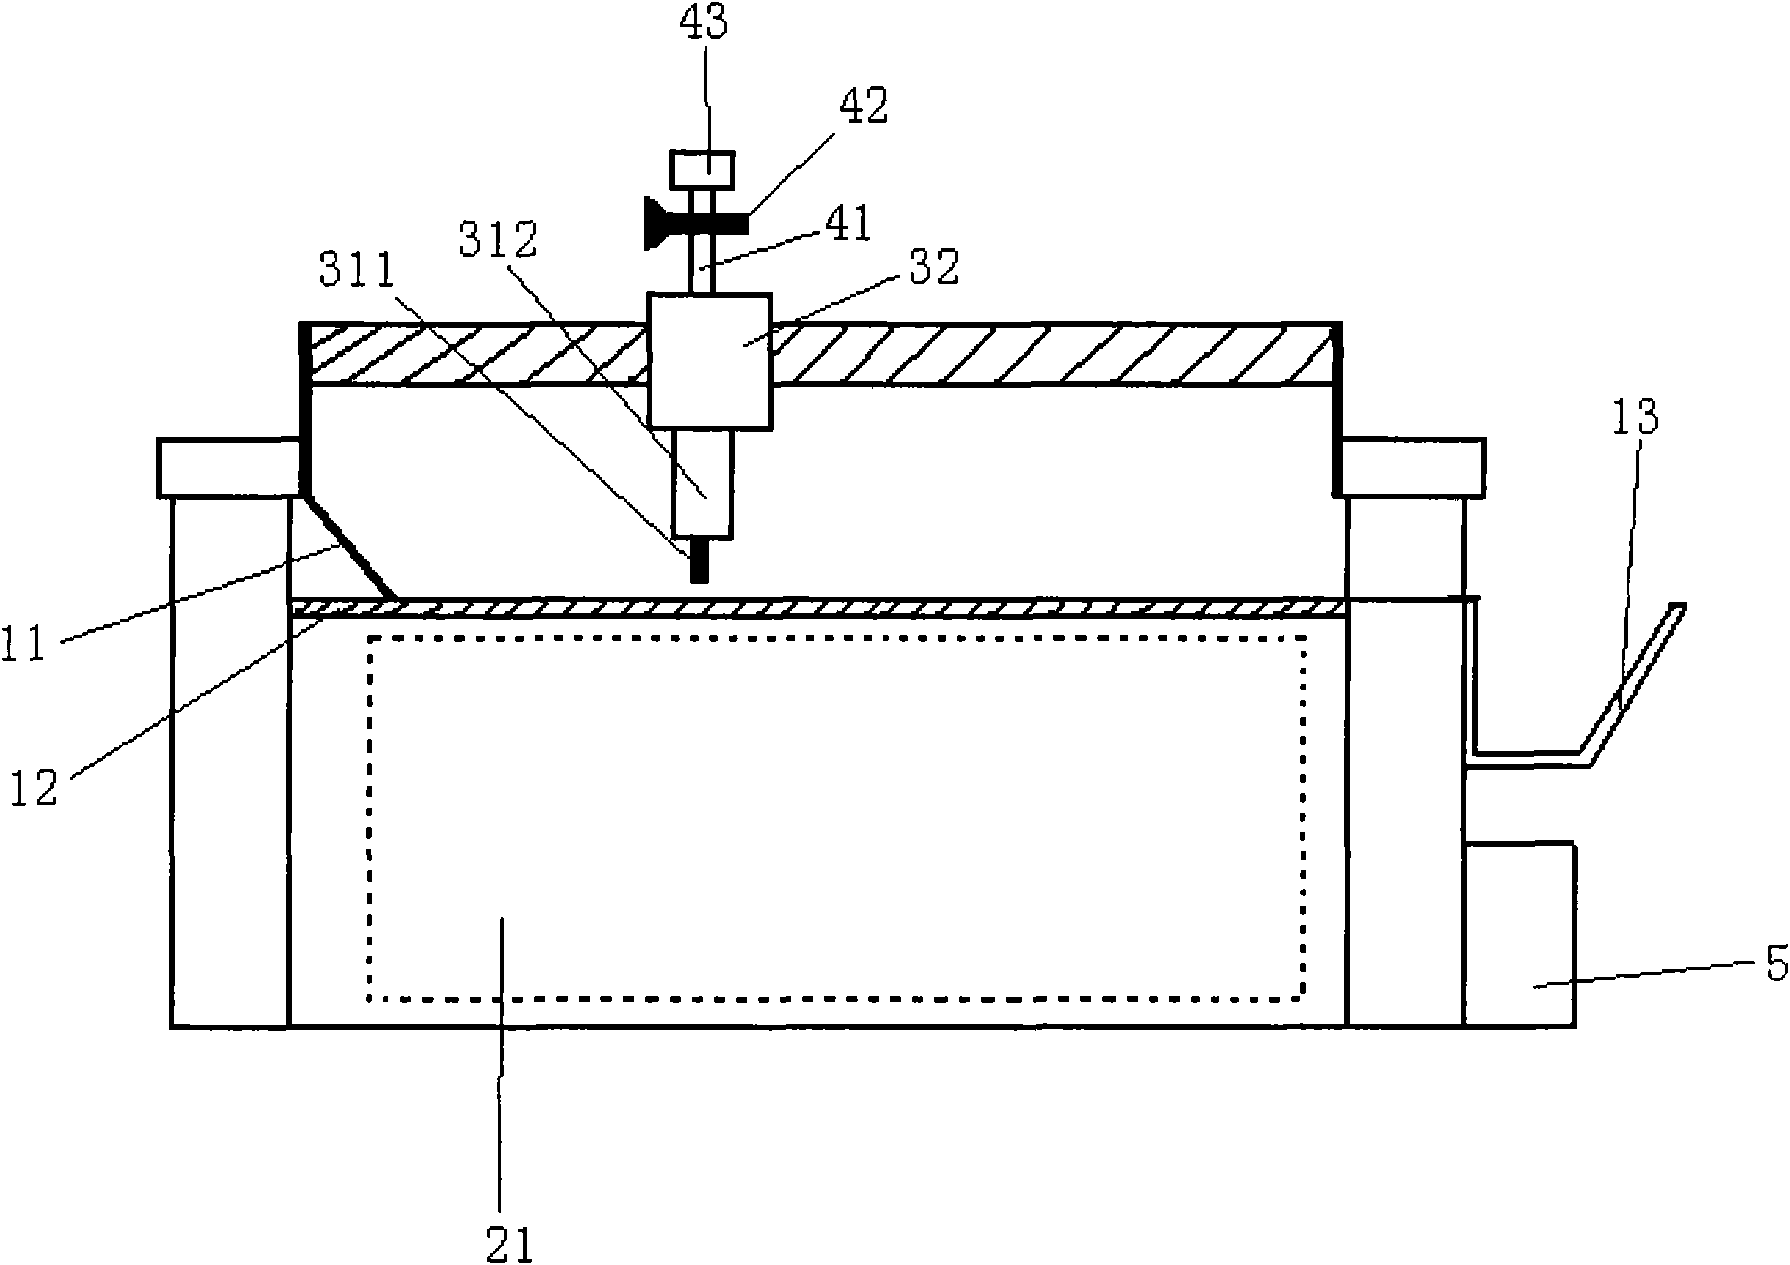 Water knife cutting control system